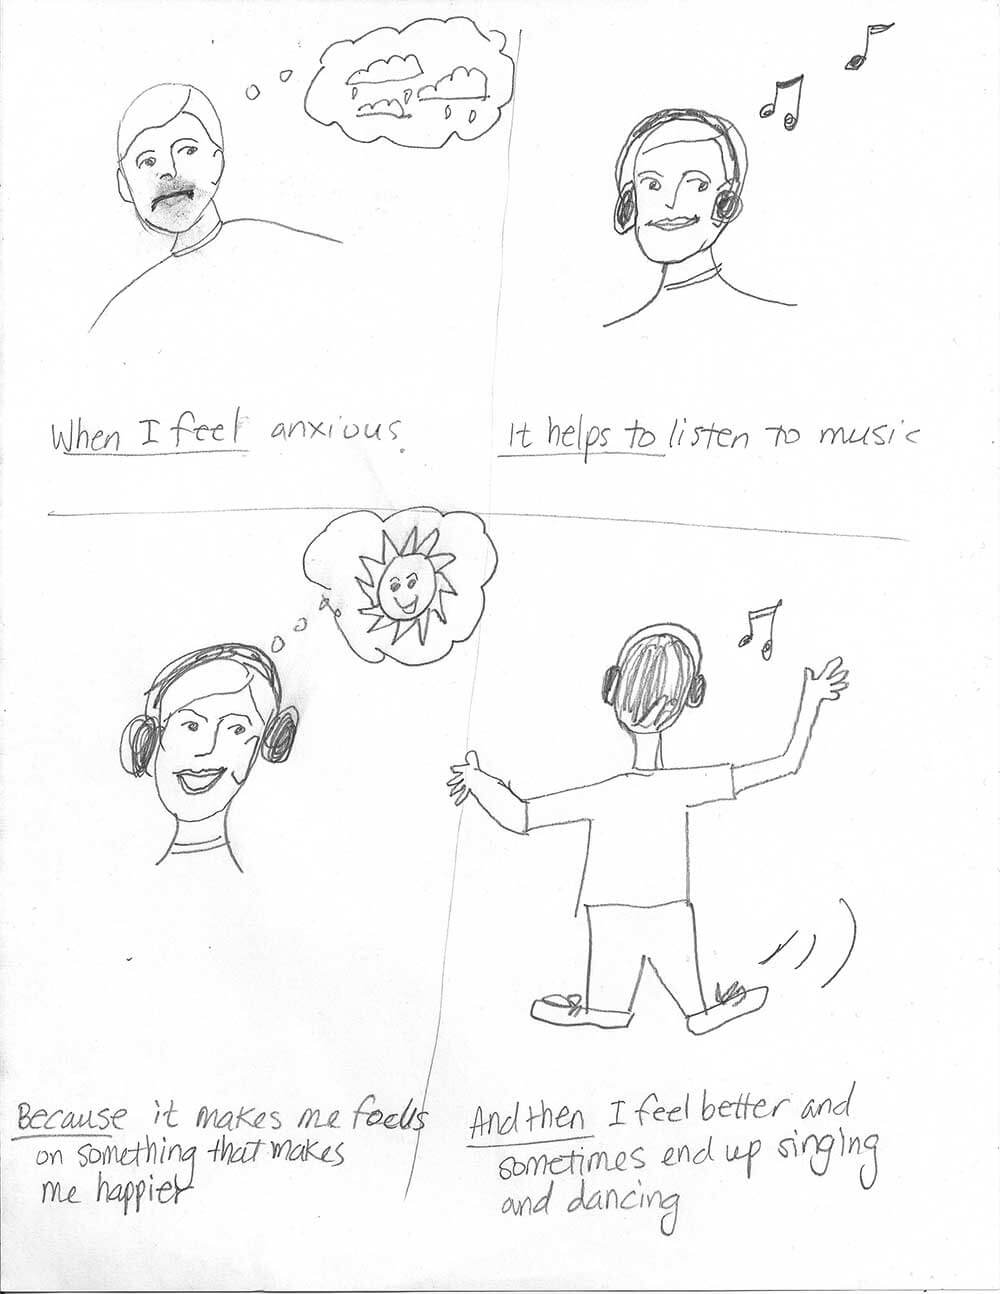 Participant’s comic: “When I feel anxious. It helps to listen to music. Because it makes me focus on something that makes me happier. And then I feel better and sometimes end up singing and dancing.” 